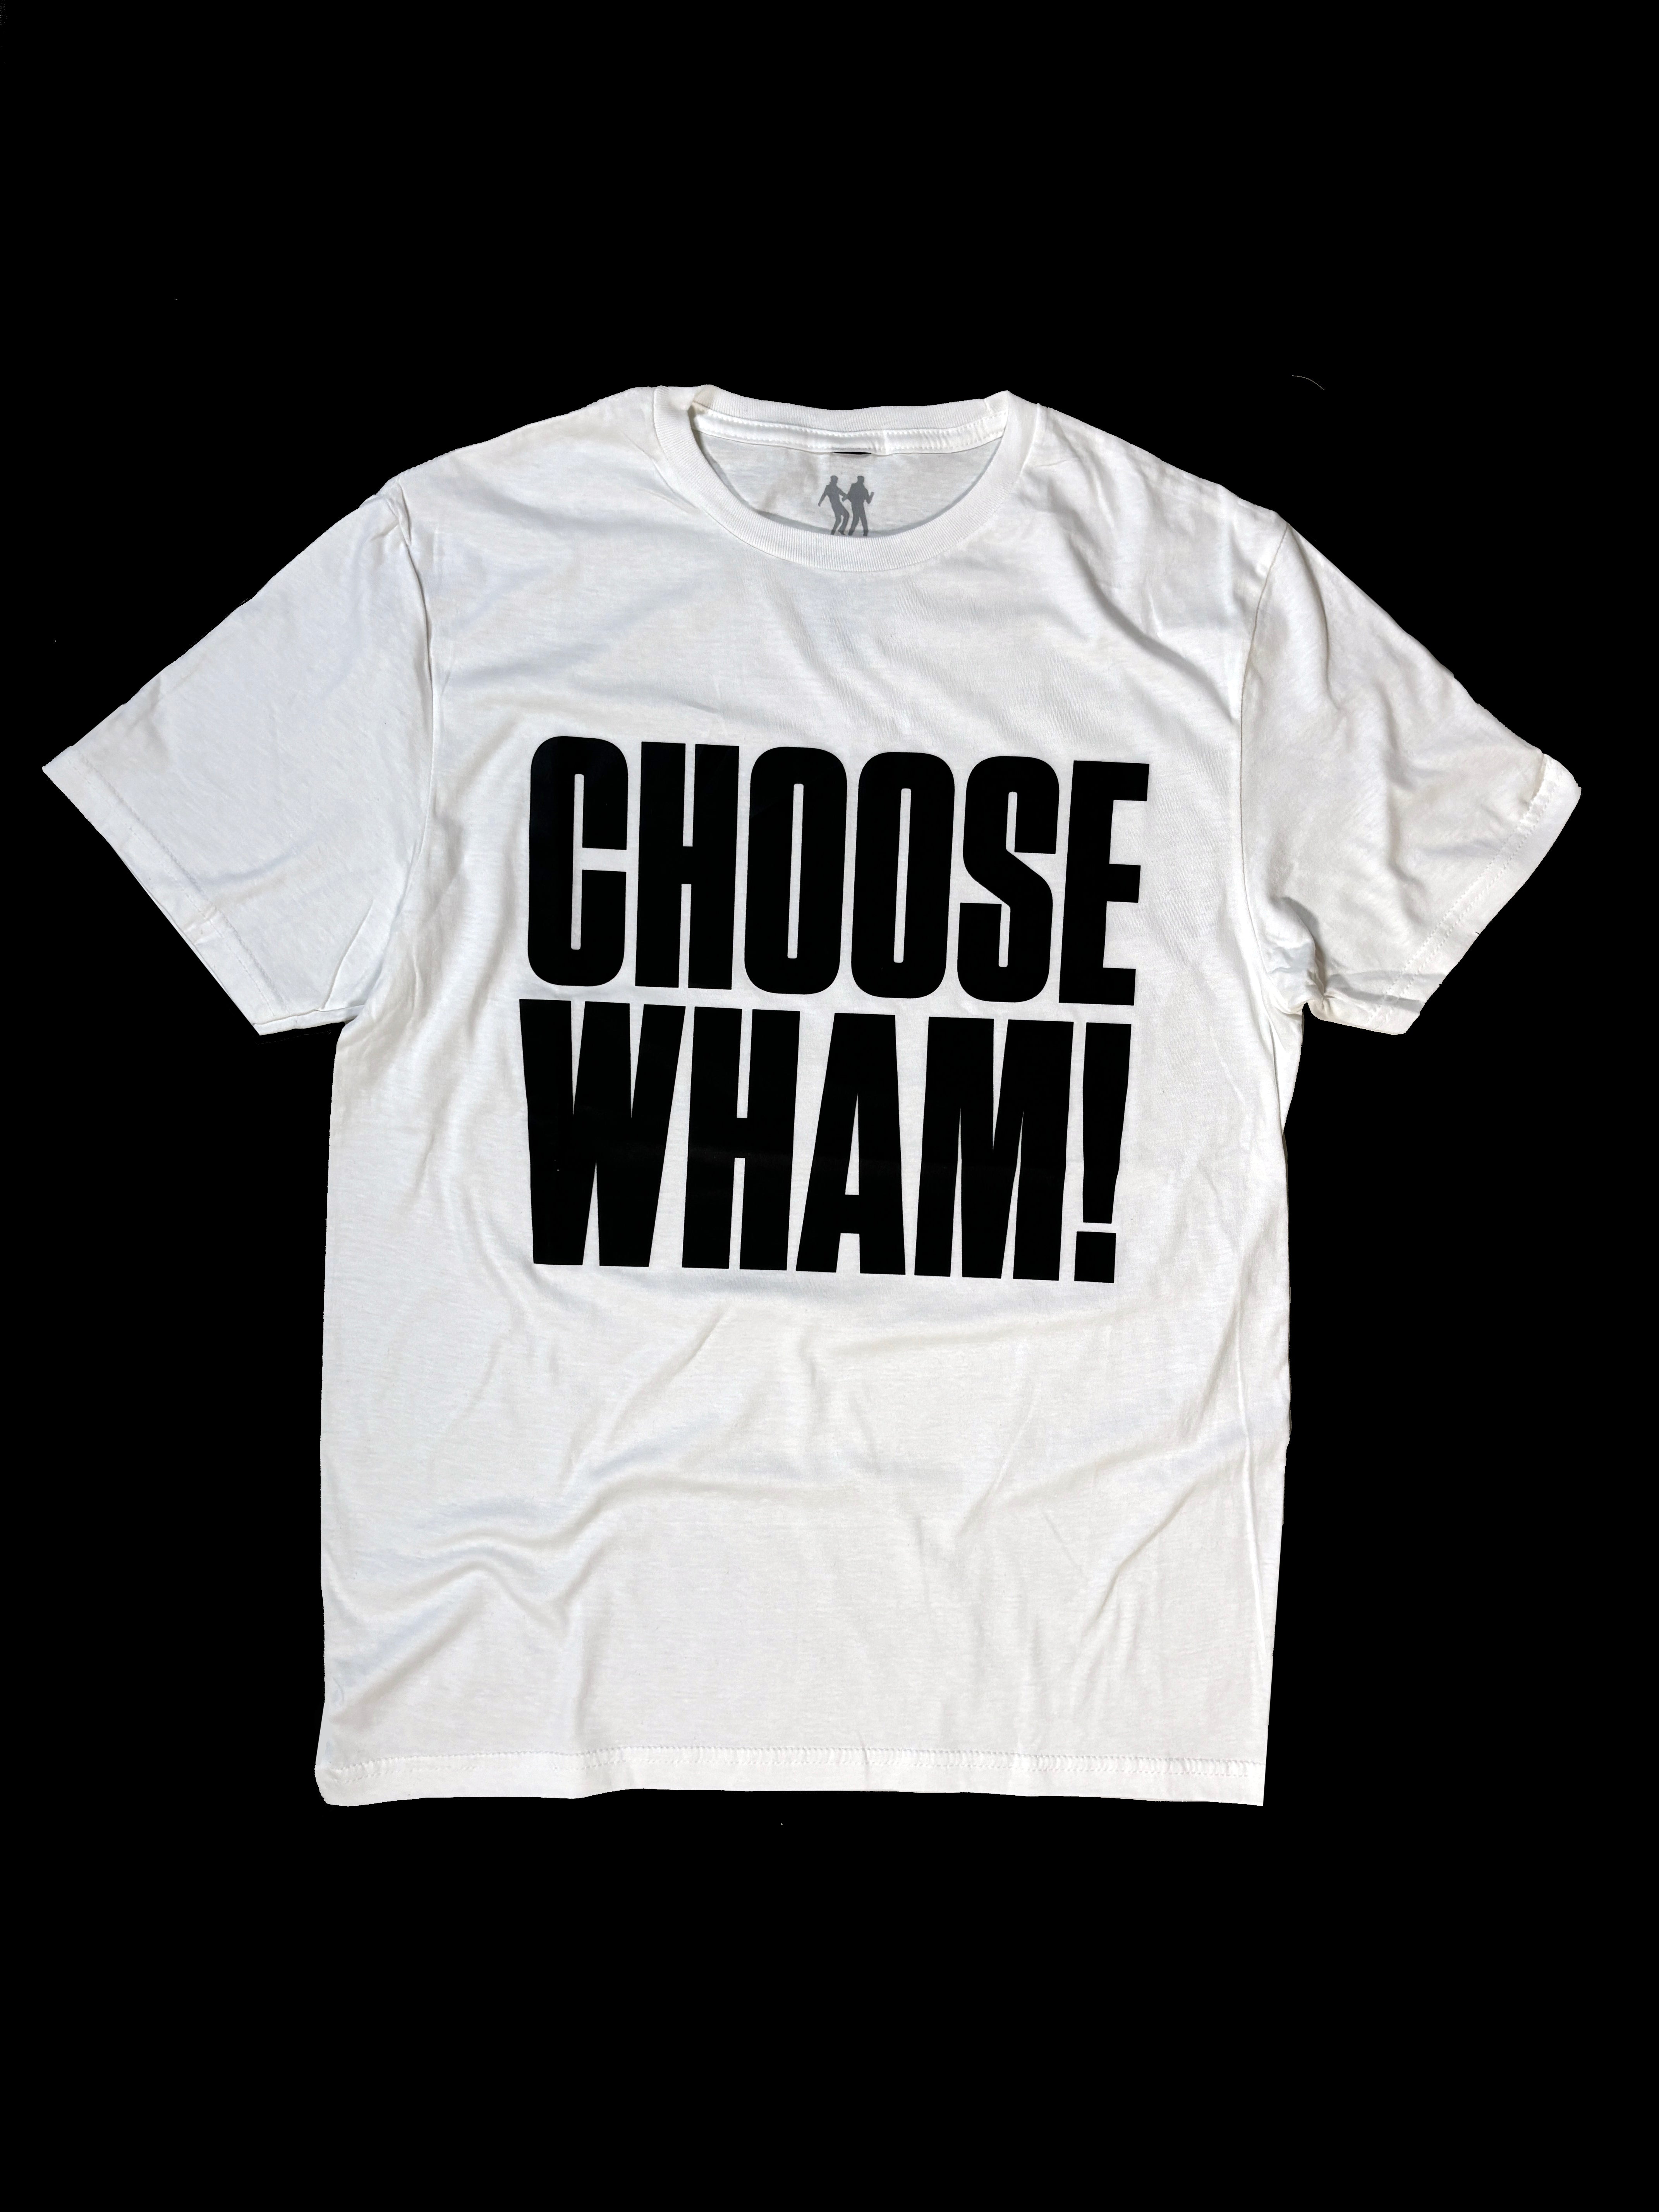 Choose Wham T-shirt - White T with Black text